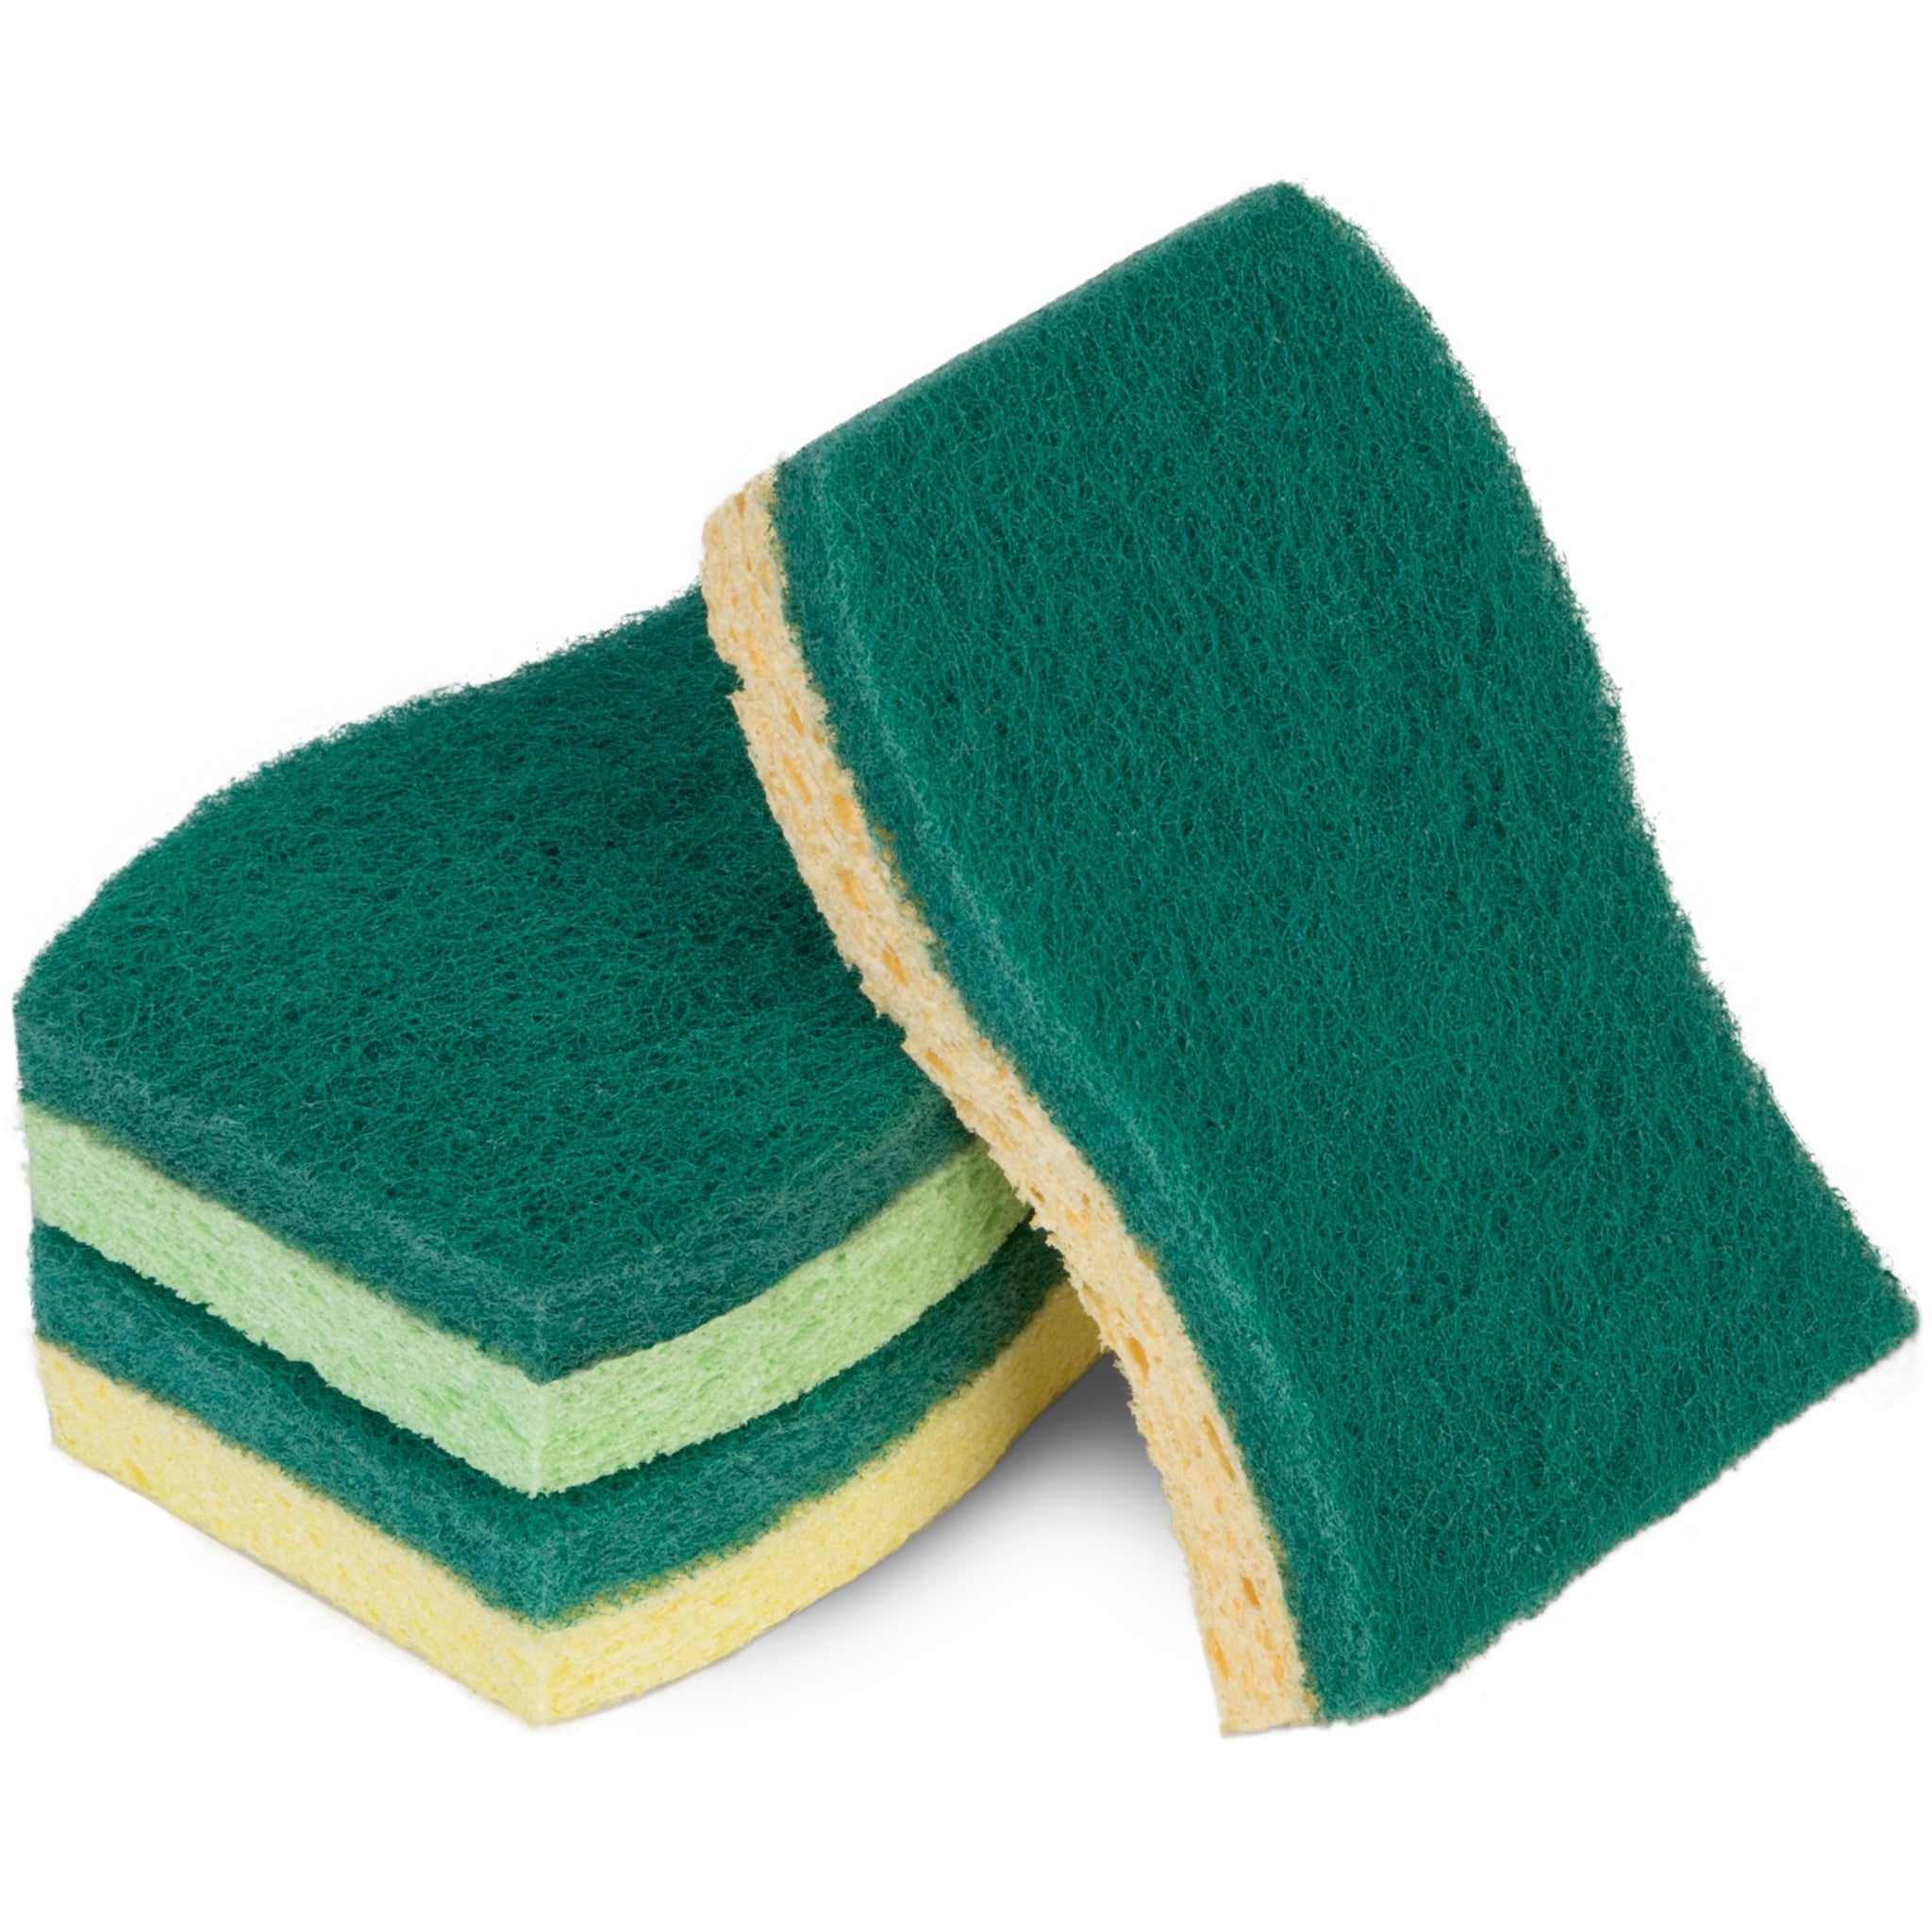 Heavy Duty Scrub Sponge - Ultra Absorbent - Ergonomic Shape - Cleaning, Dishes, & Hard Stains - Green by Smart Design 1